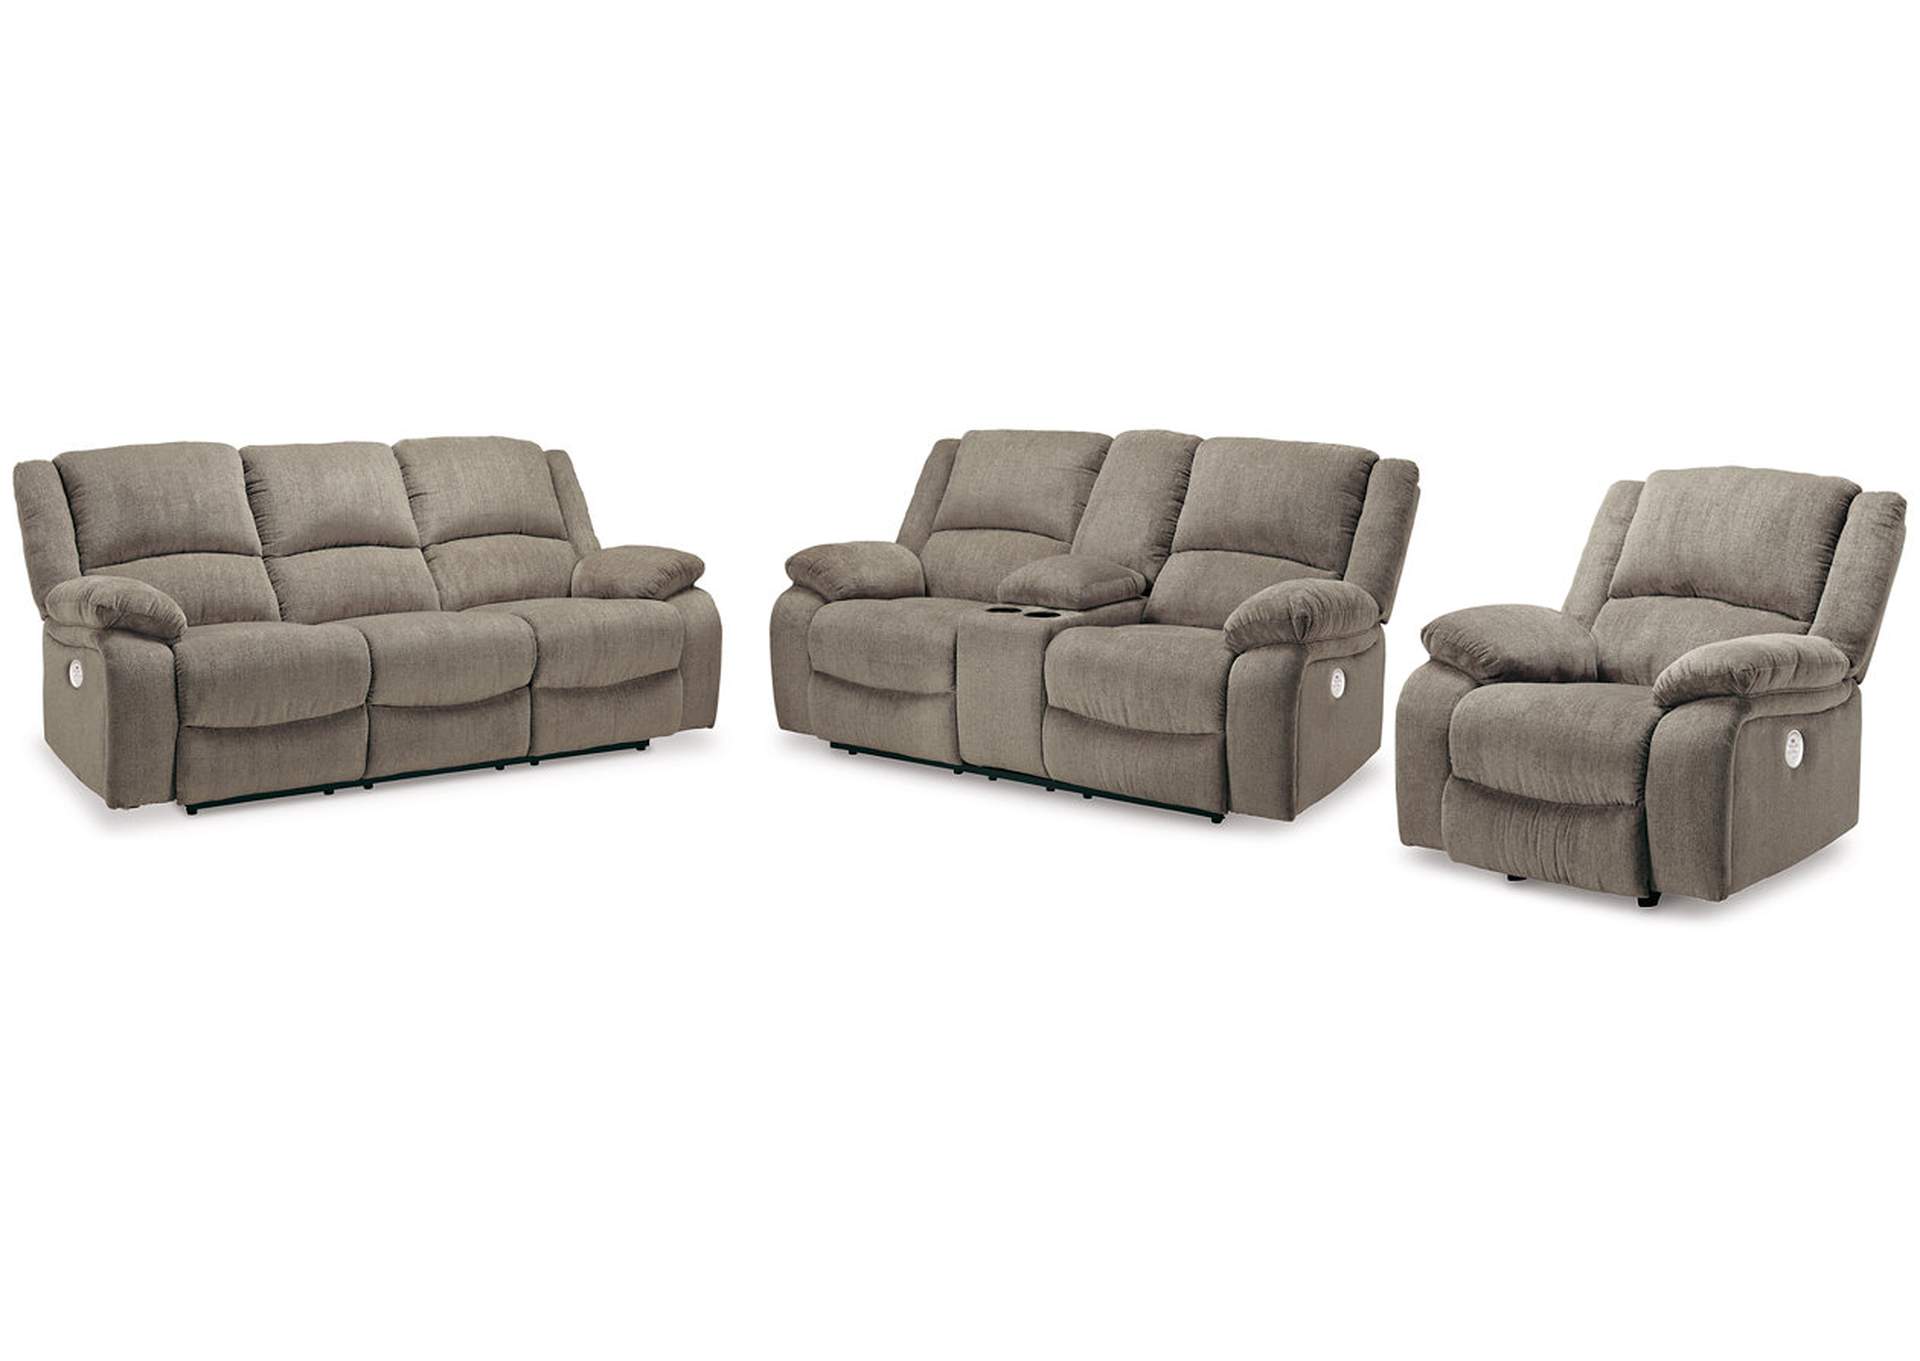 Draycoll Sofa Loveseat And Recliner